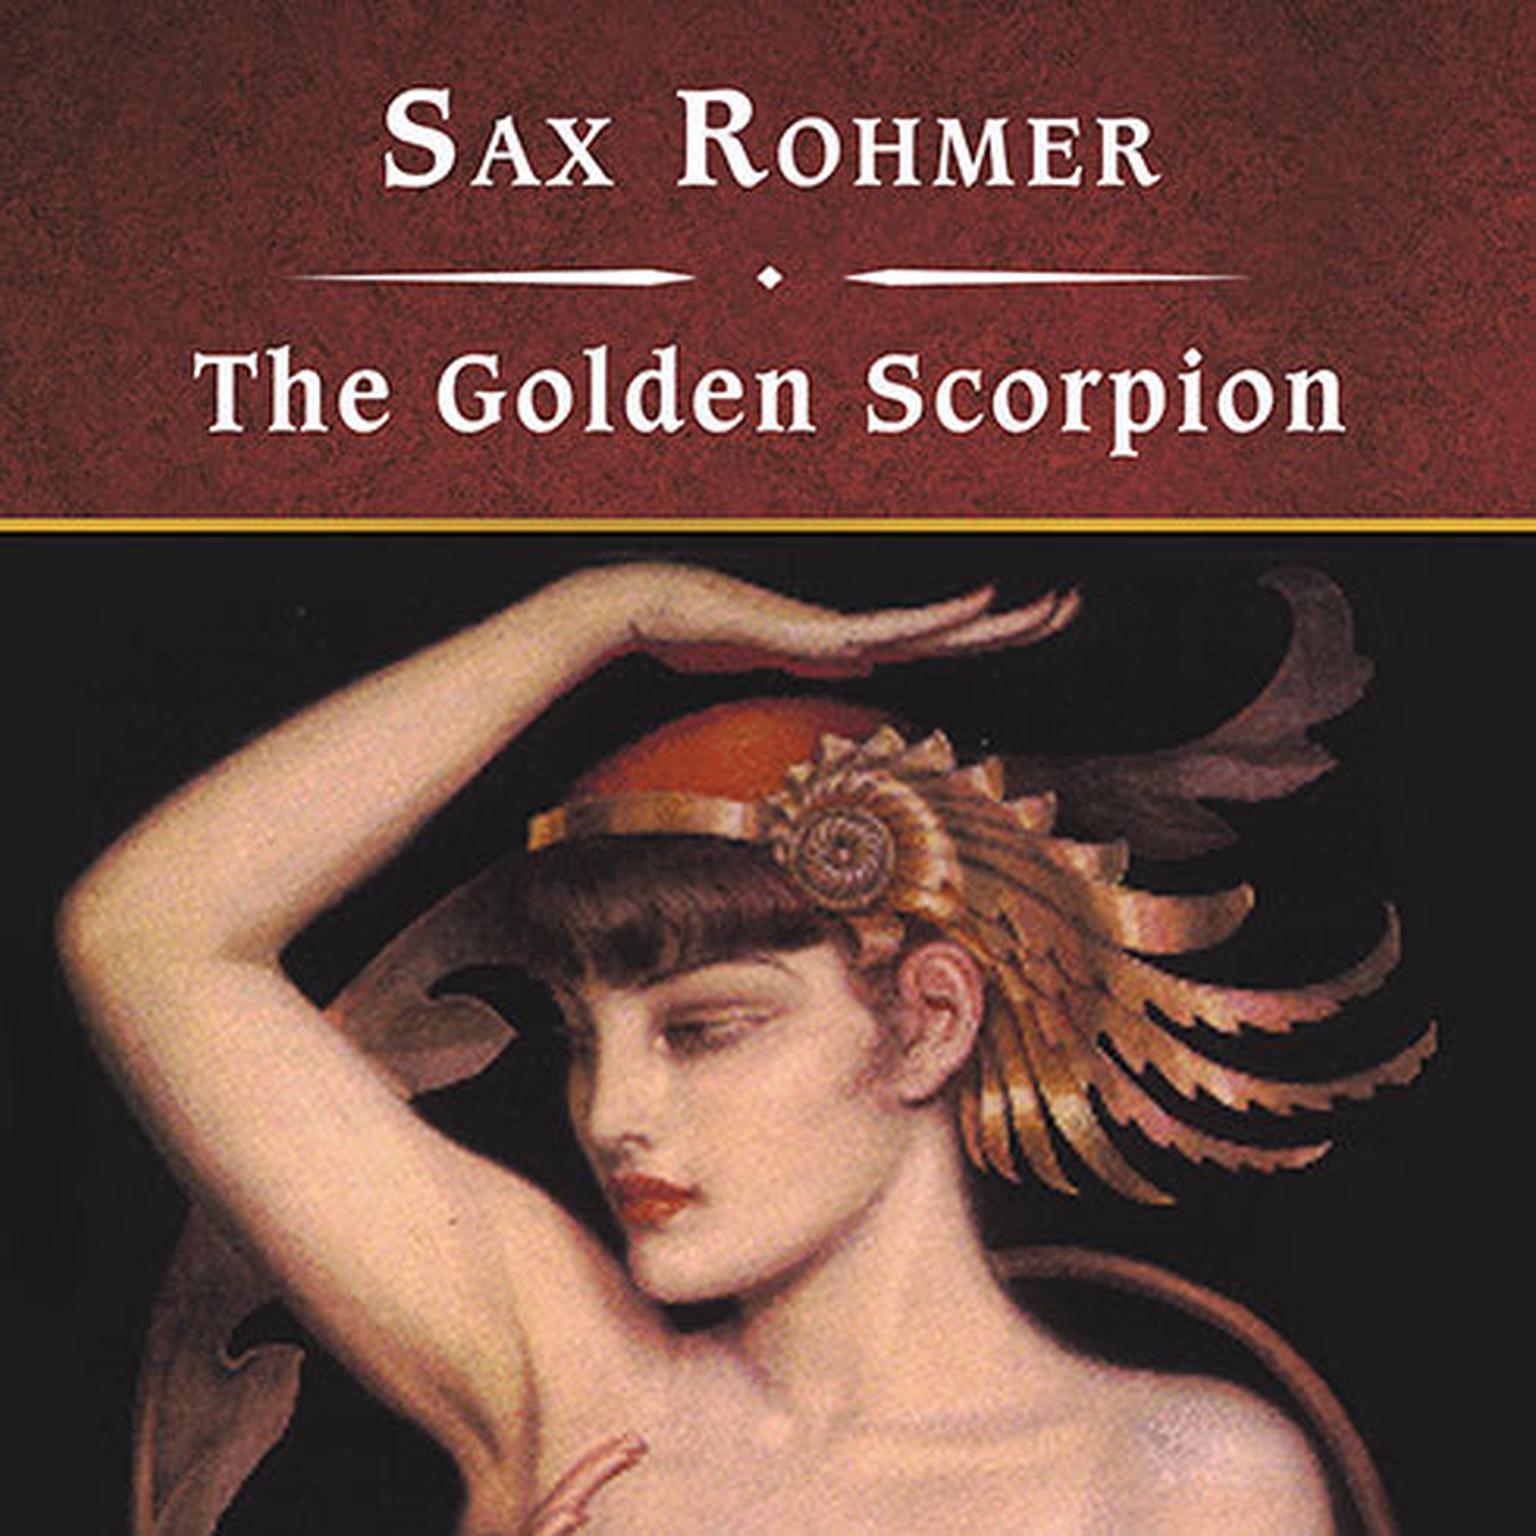 The Golden Scorpion, with eBook Audiobook, by Sax Rohmer